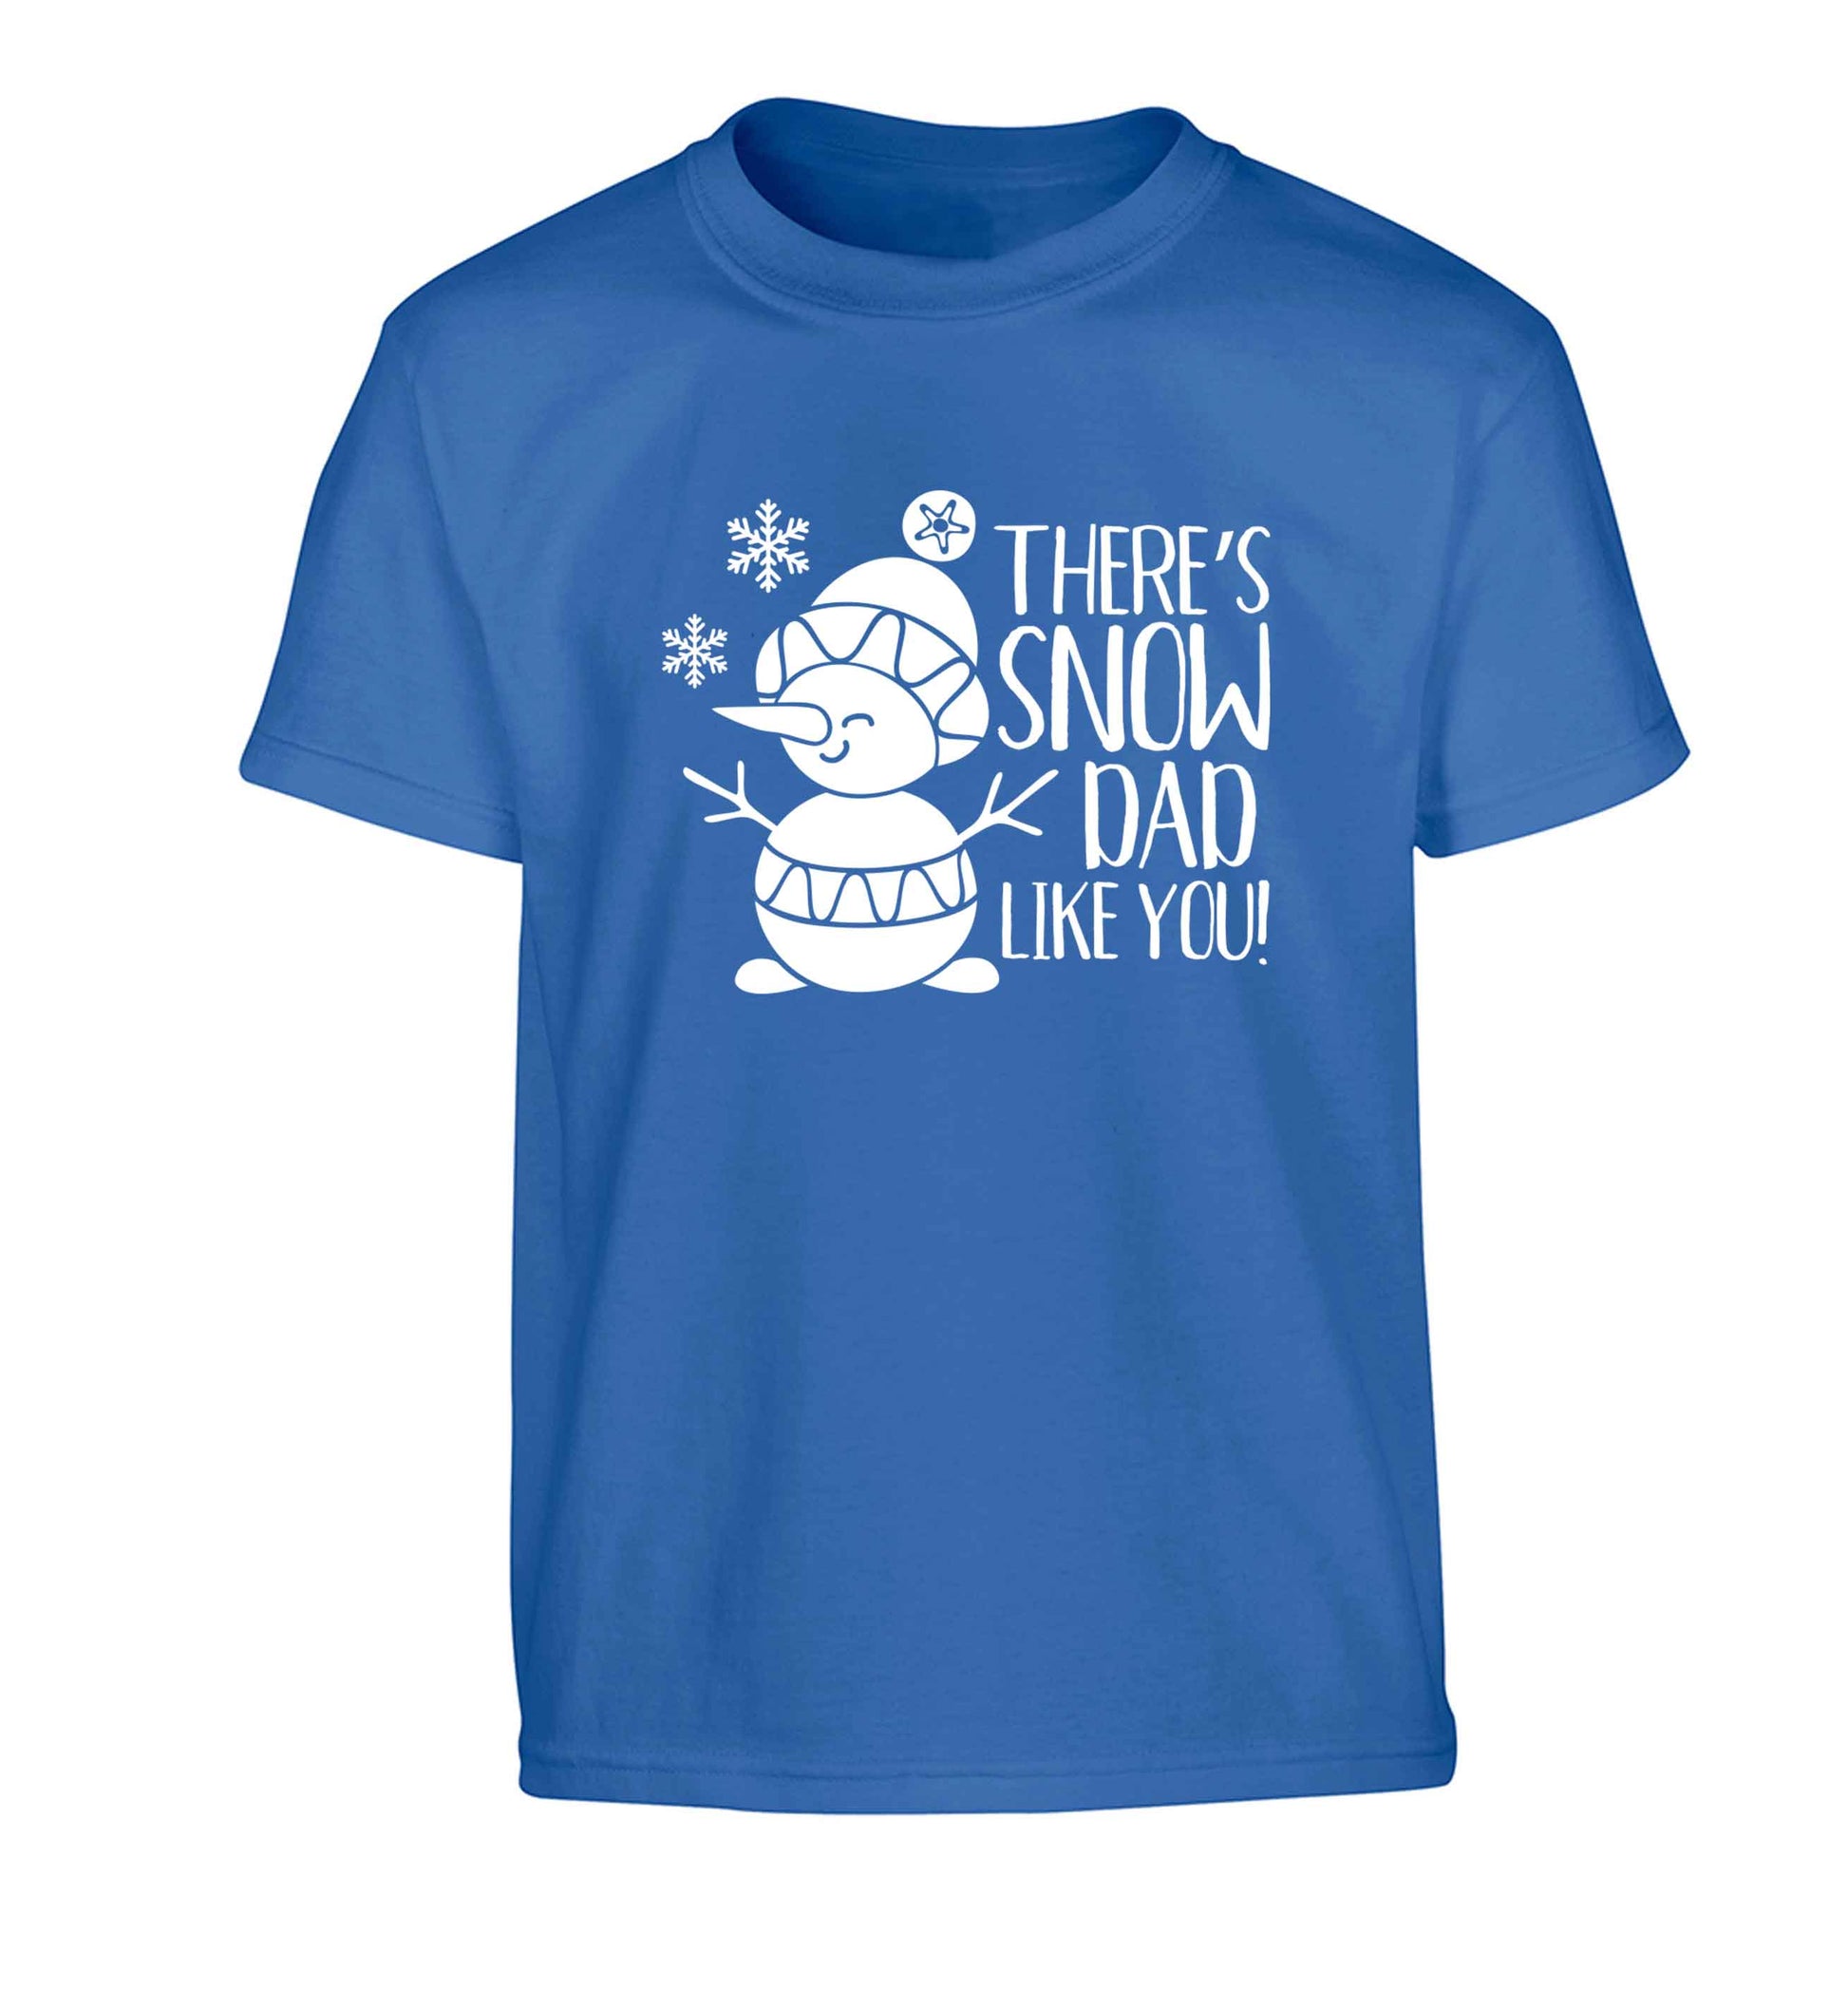 There's snow dad like you Children's blue Tshirt 12-13 Years